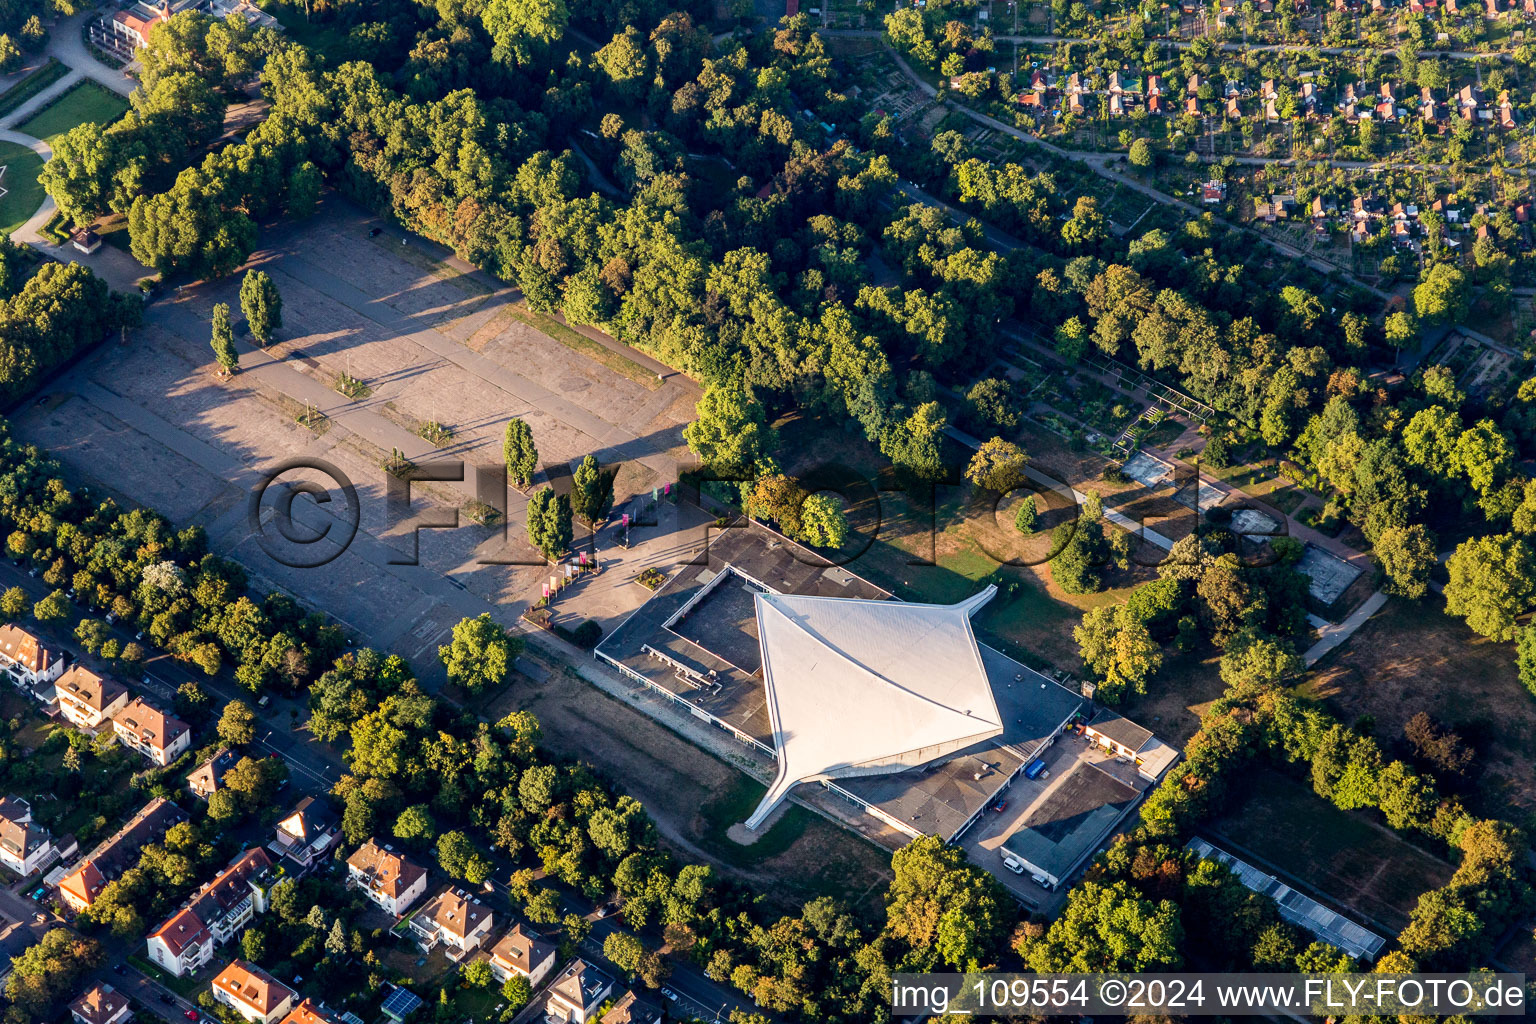 Building of the indoor arena FRIEDRICH-EBERT-HALLE in Ebertpark in Ludwigshafen am Rhein in the state Rhineland-Palatinate, Germany